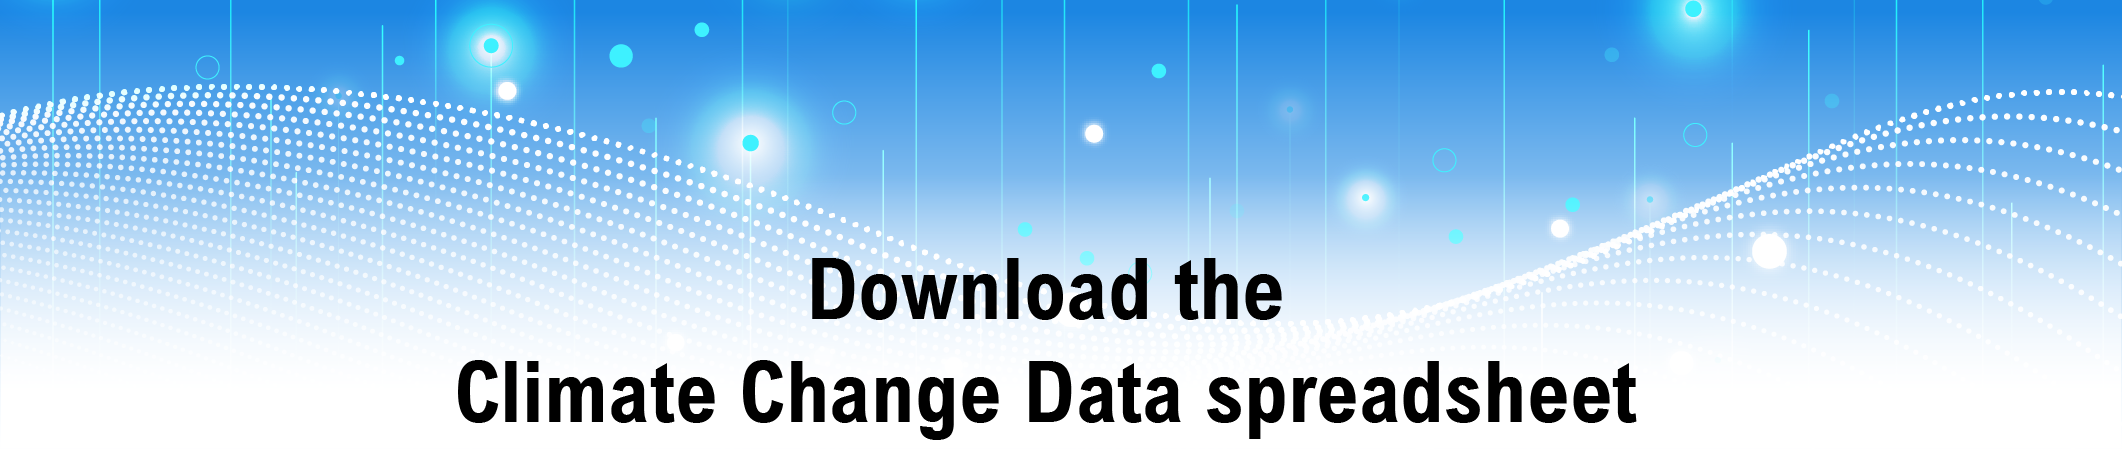 Download the Climate Change Data spreadsheet